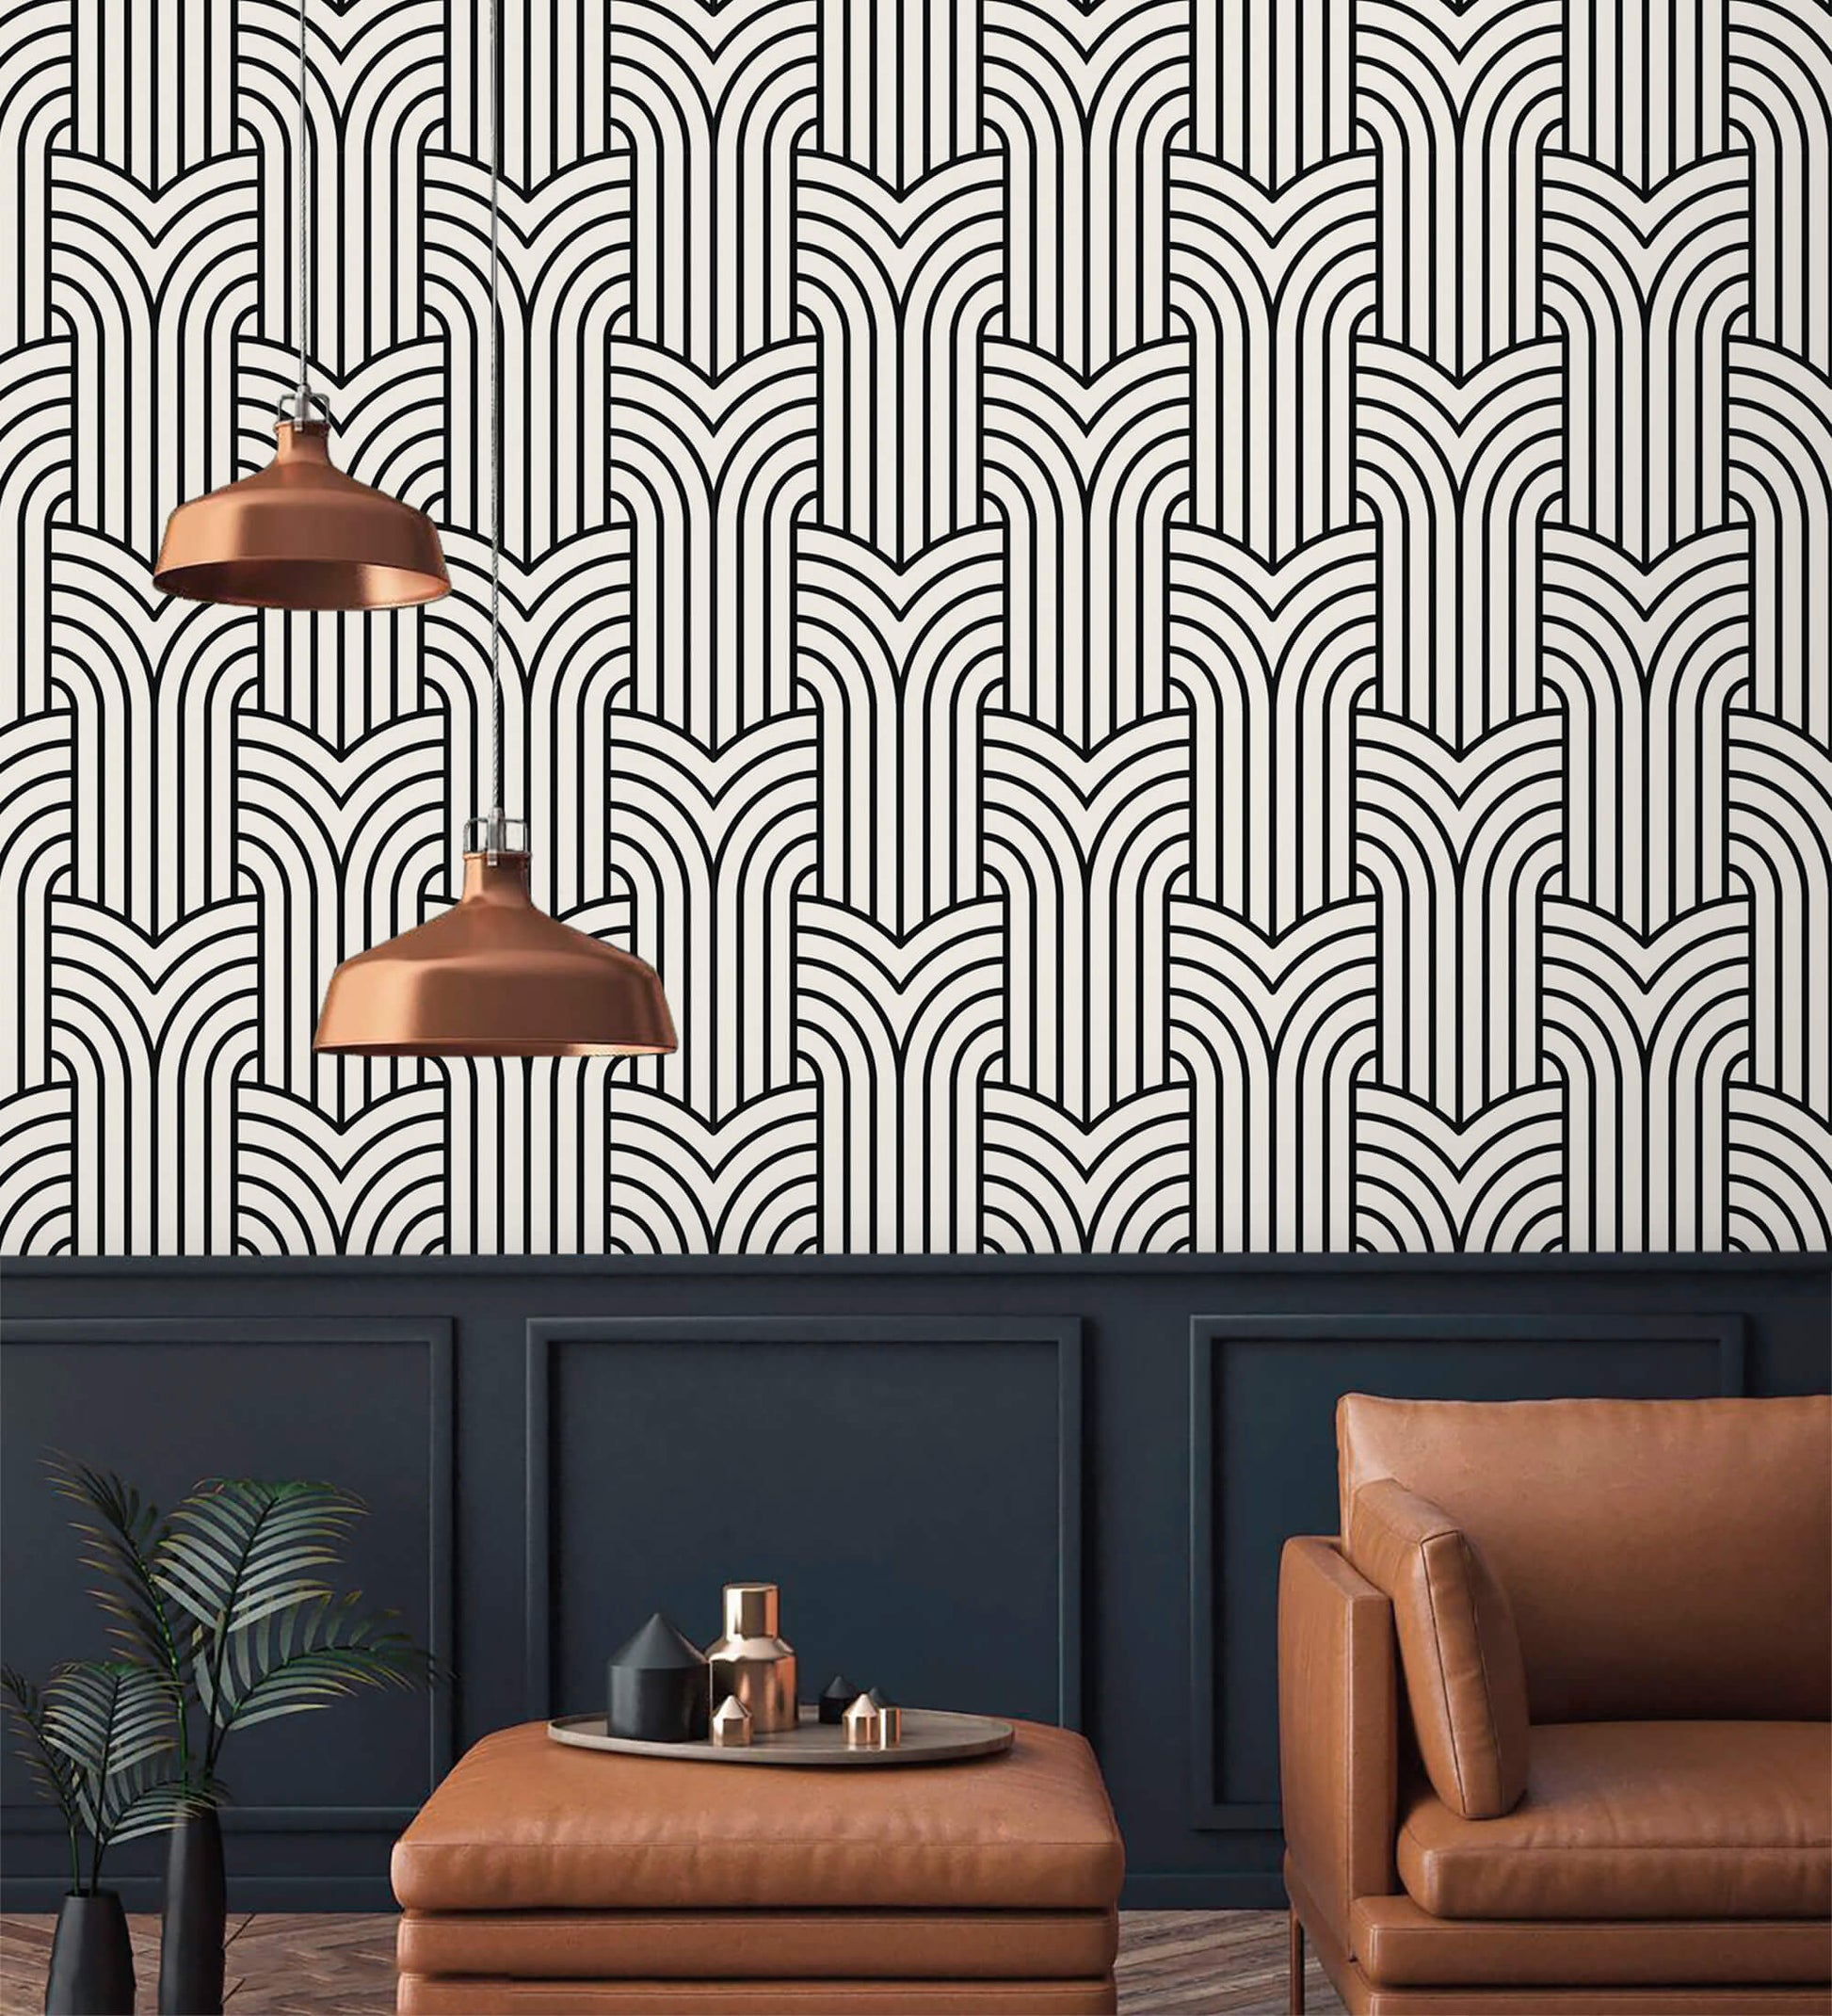 Vintage Ornate Outline Wallpaper: Embrace the timeless charm of yesteryears with this exquisite design, featuring intricate ornate outlines that add a touch of vintage elegance to your space.